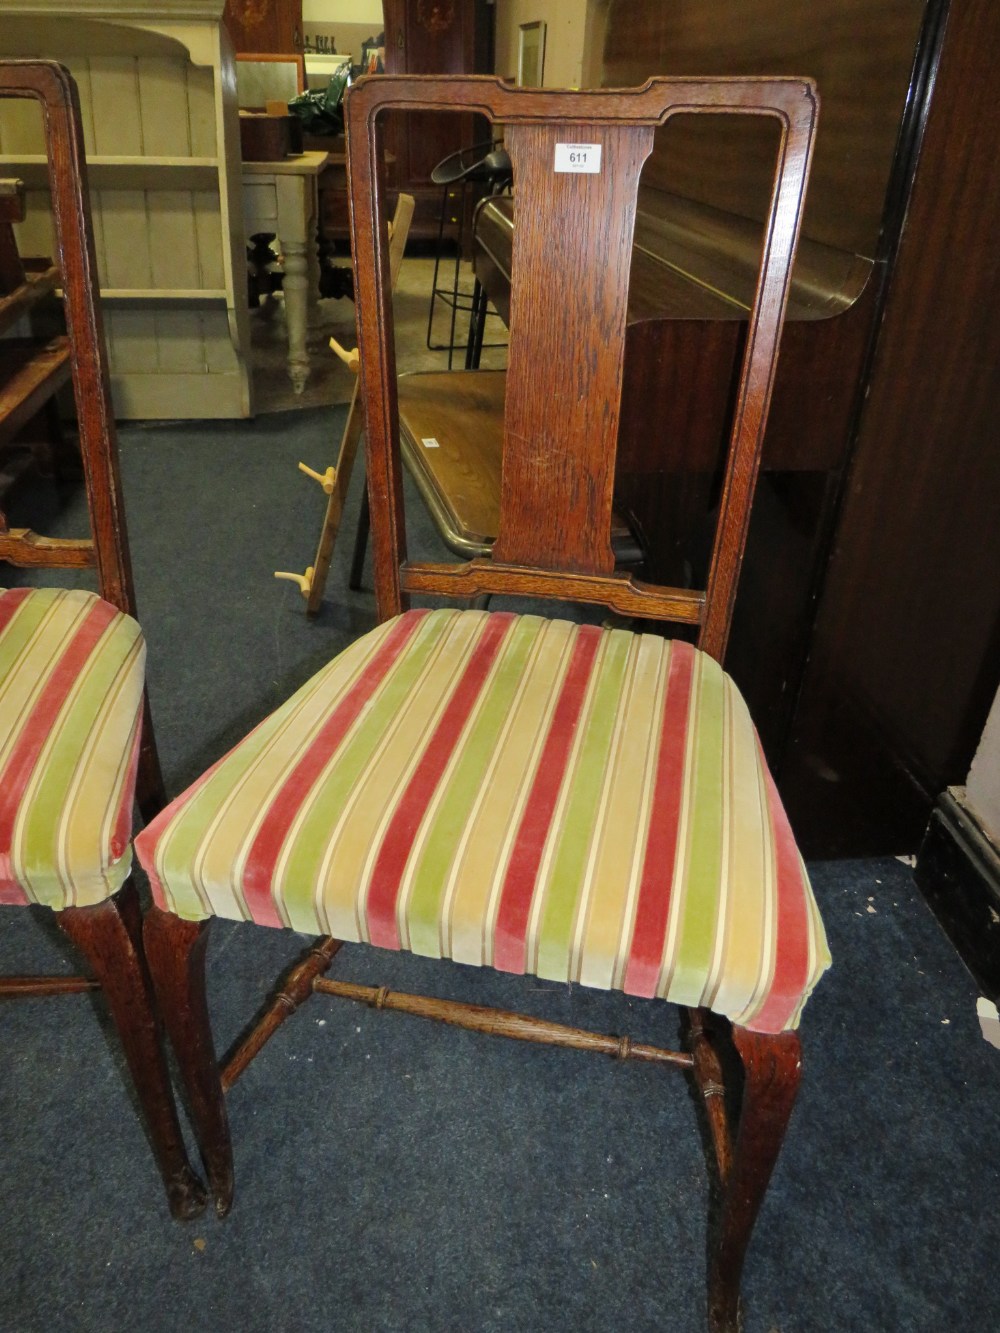 A PAIR OF OAK BEDROOM CHAIRS - Image 2 of 4